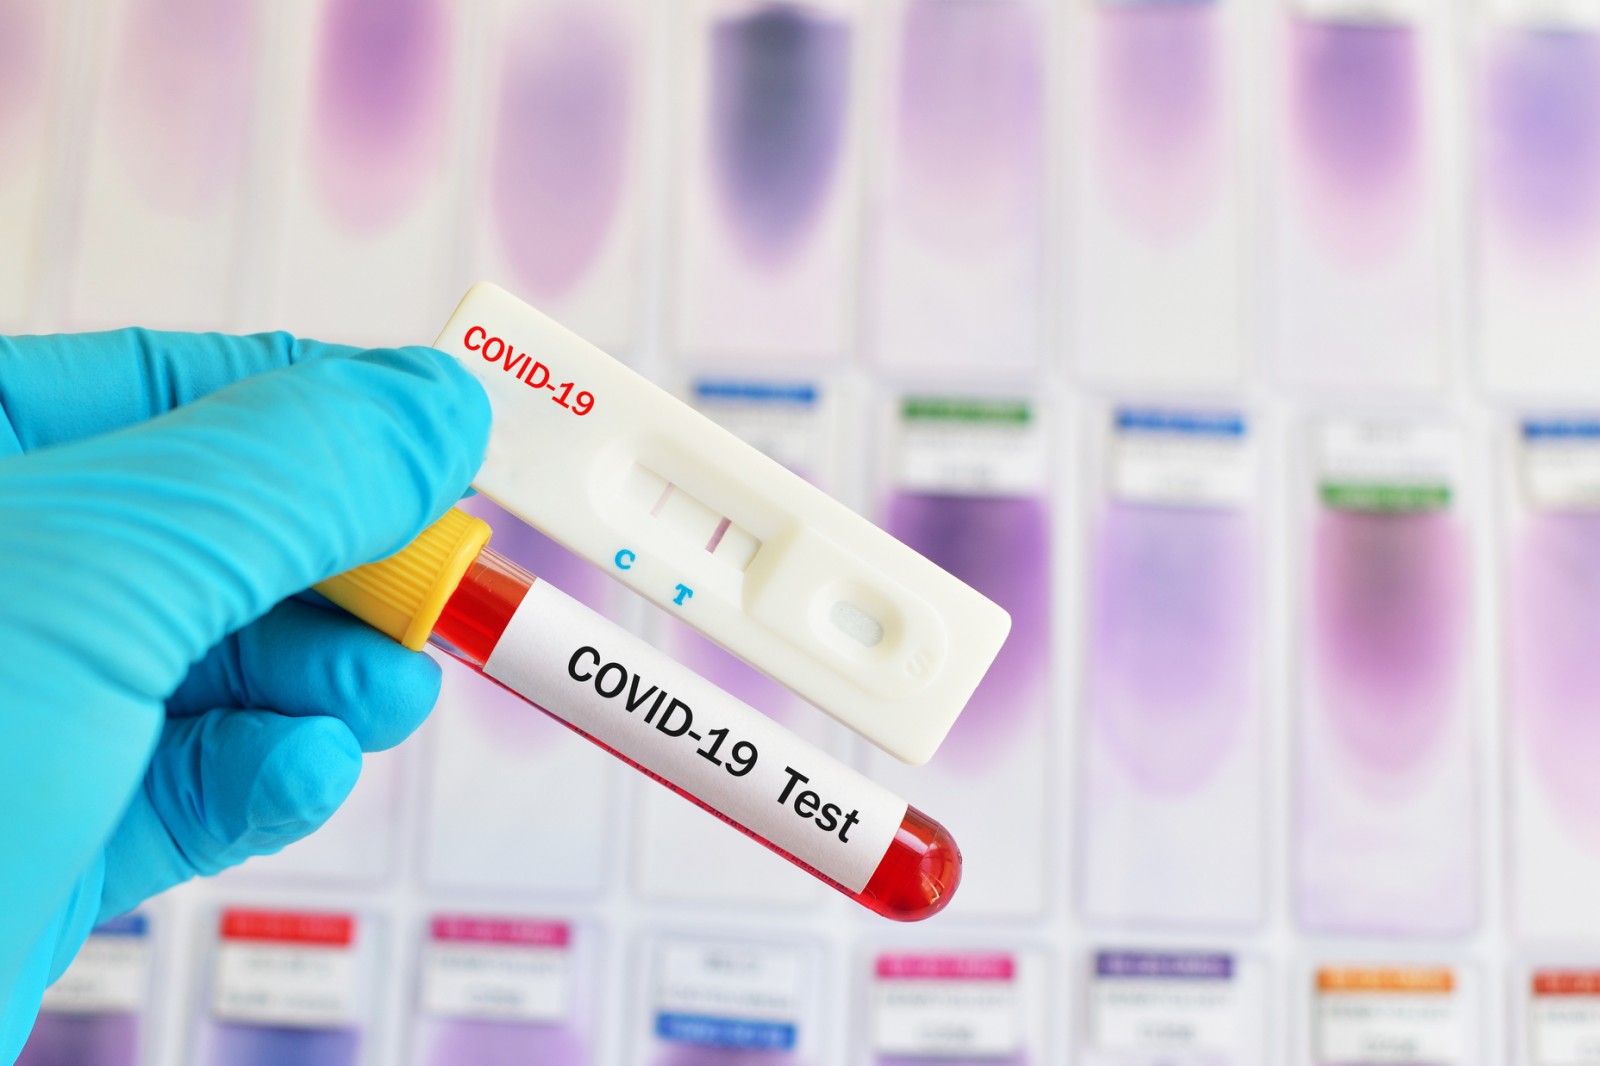 Rapid test or PCR: which one is better?